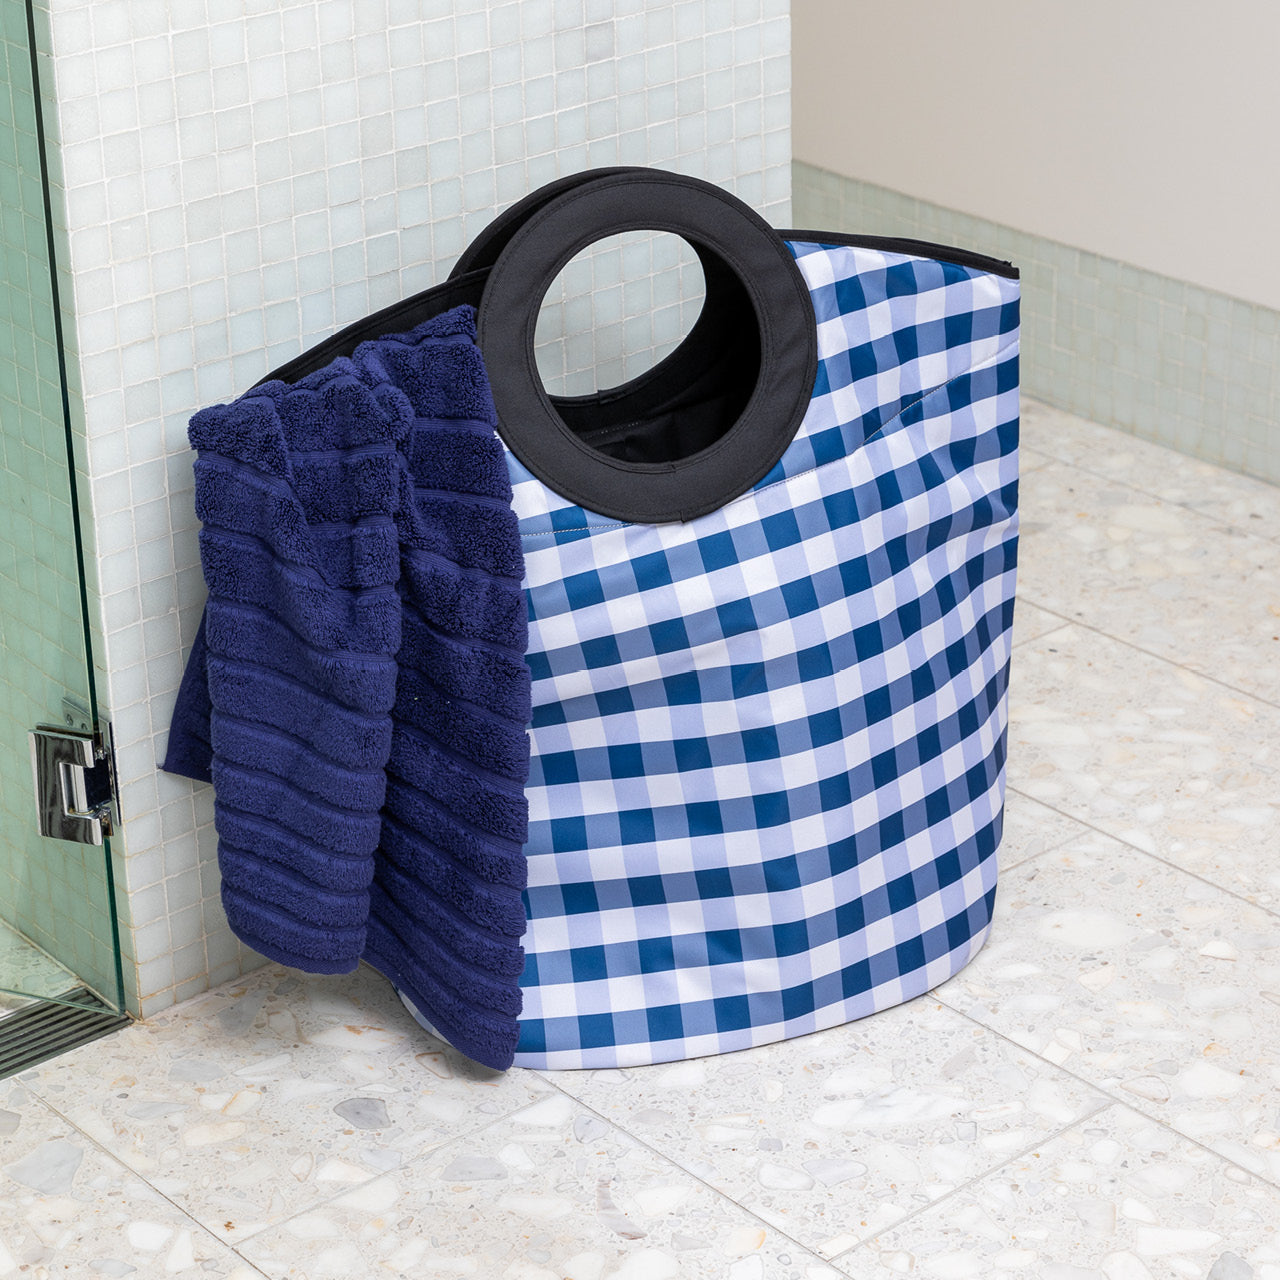 Trinity Laundry Bag in bathroom with a towel inside and handles out